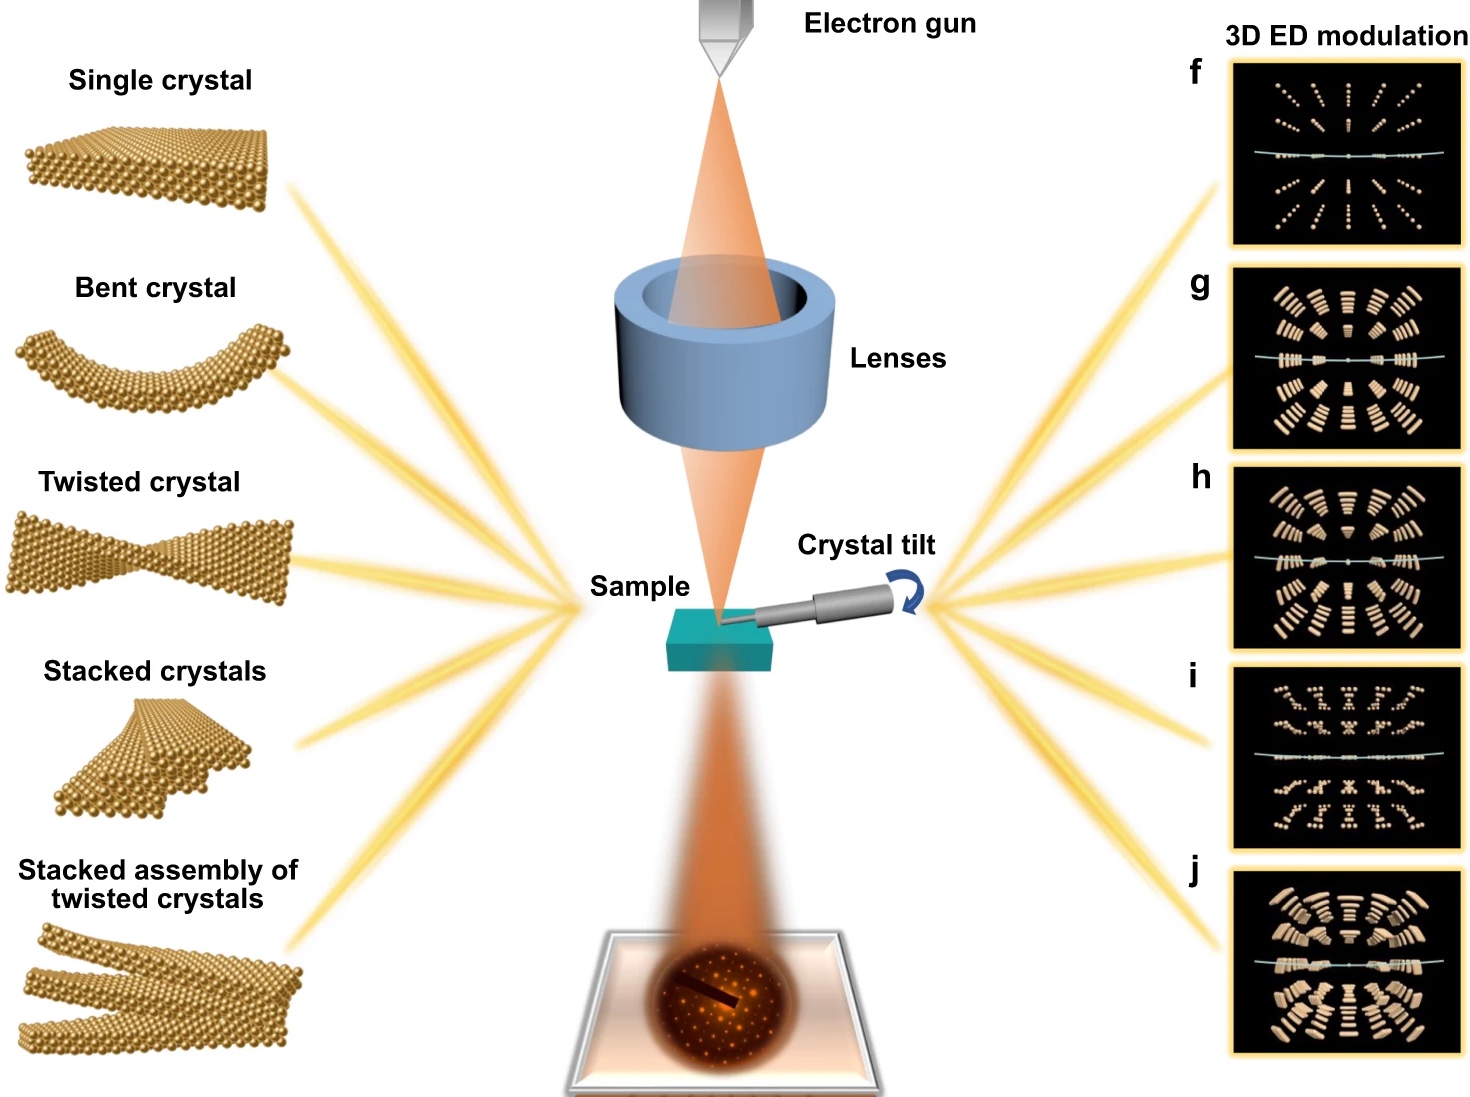 Synchronous quantitative analysis of chiral mesostructured inorganic crystals by 3D electron diffraction tomography